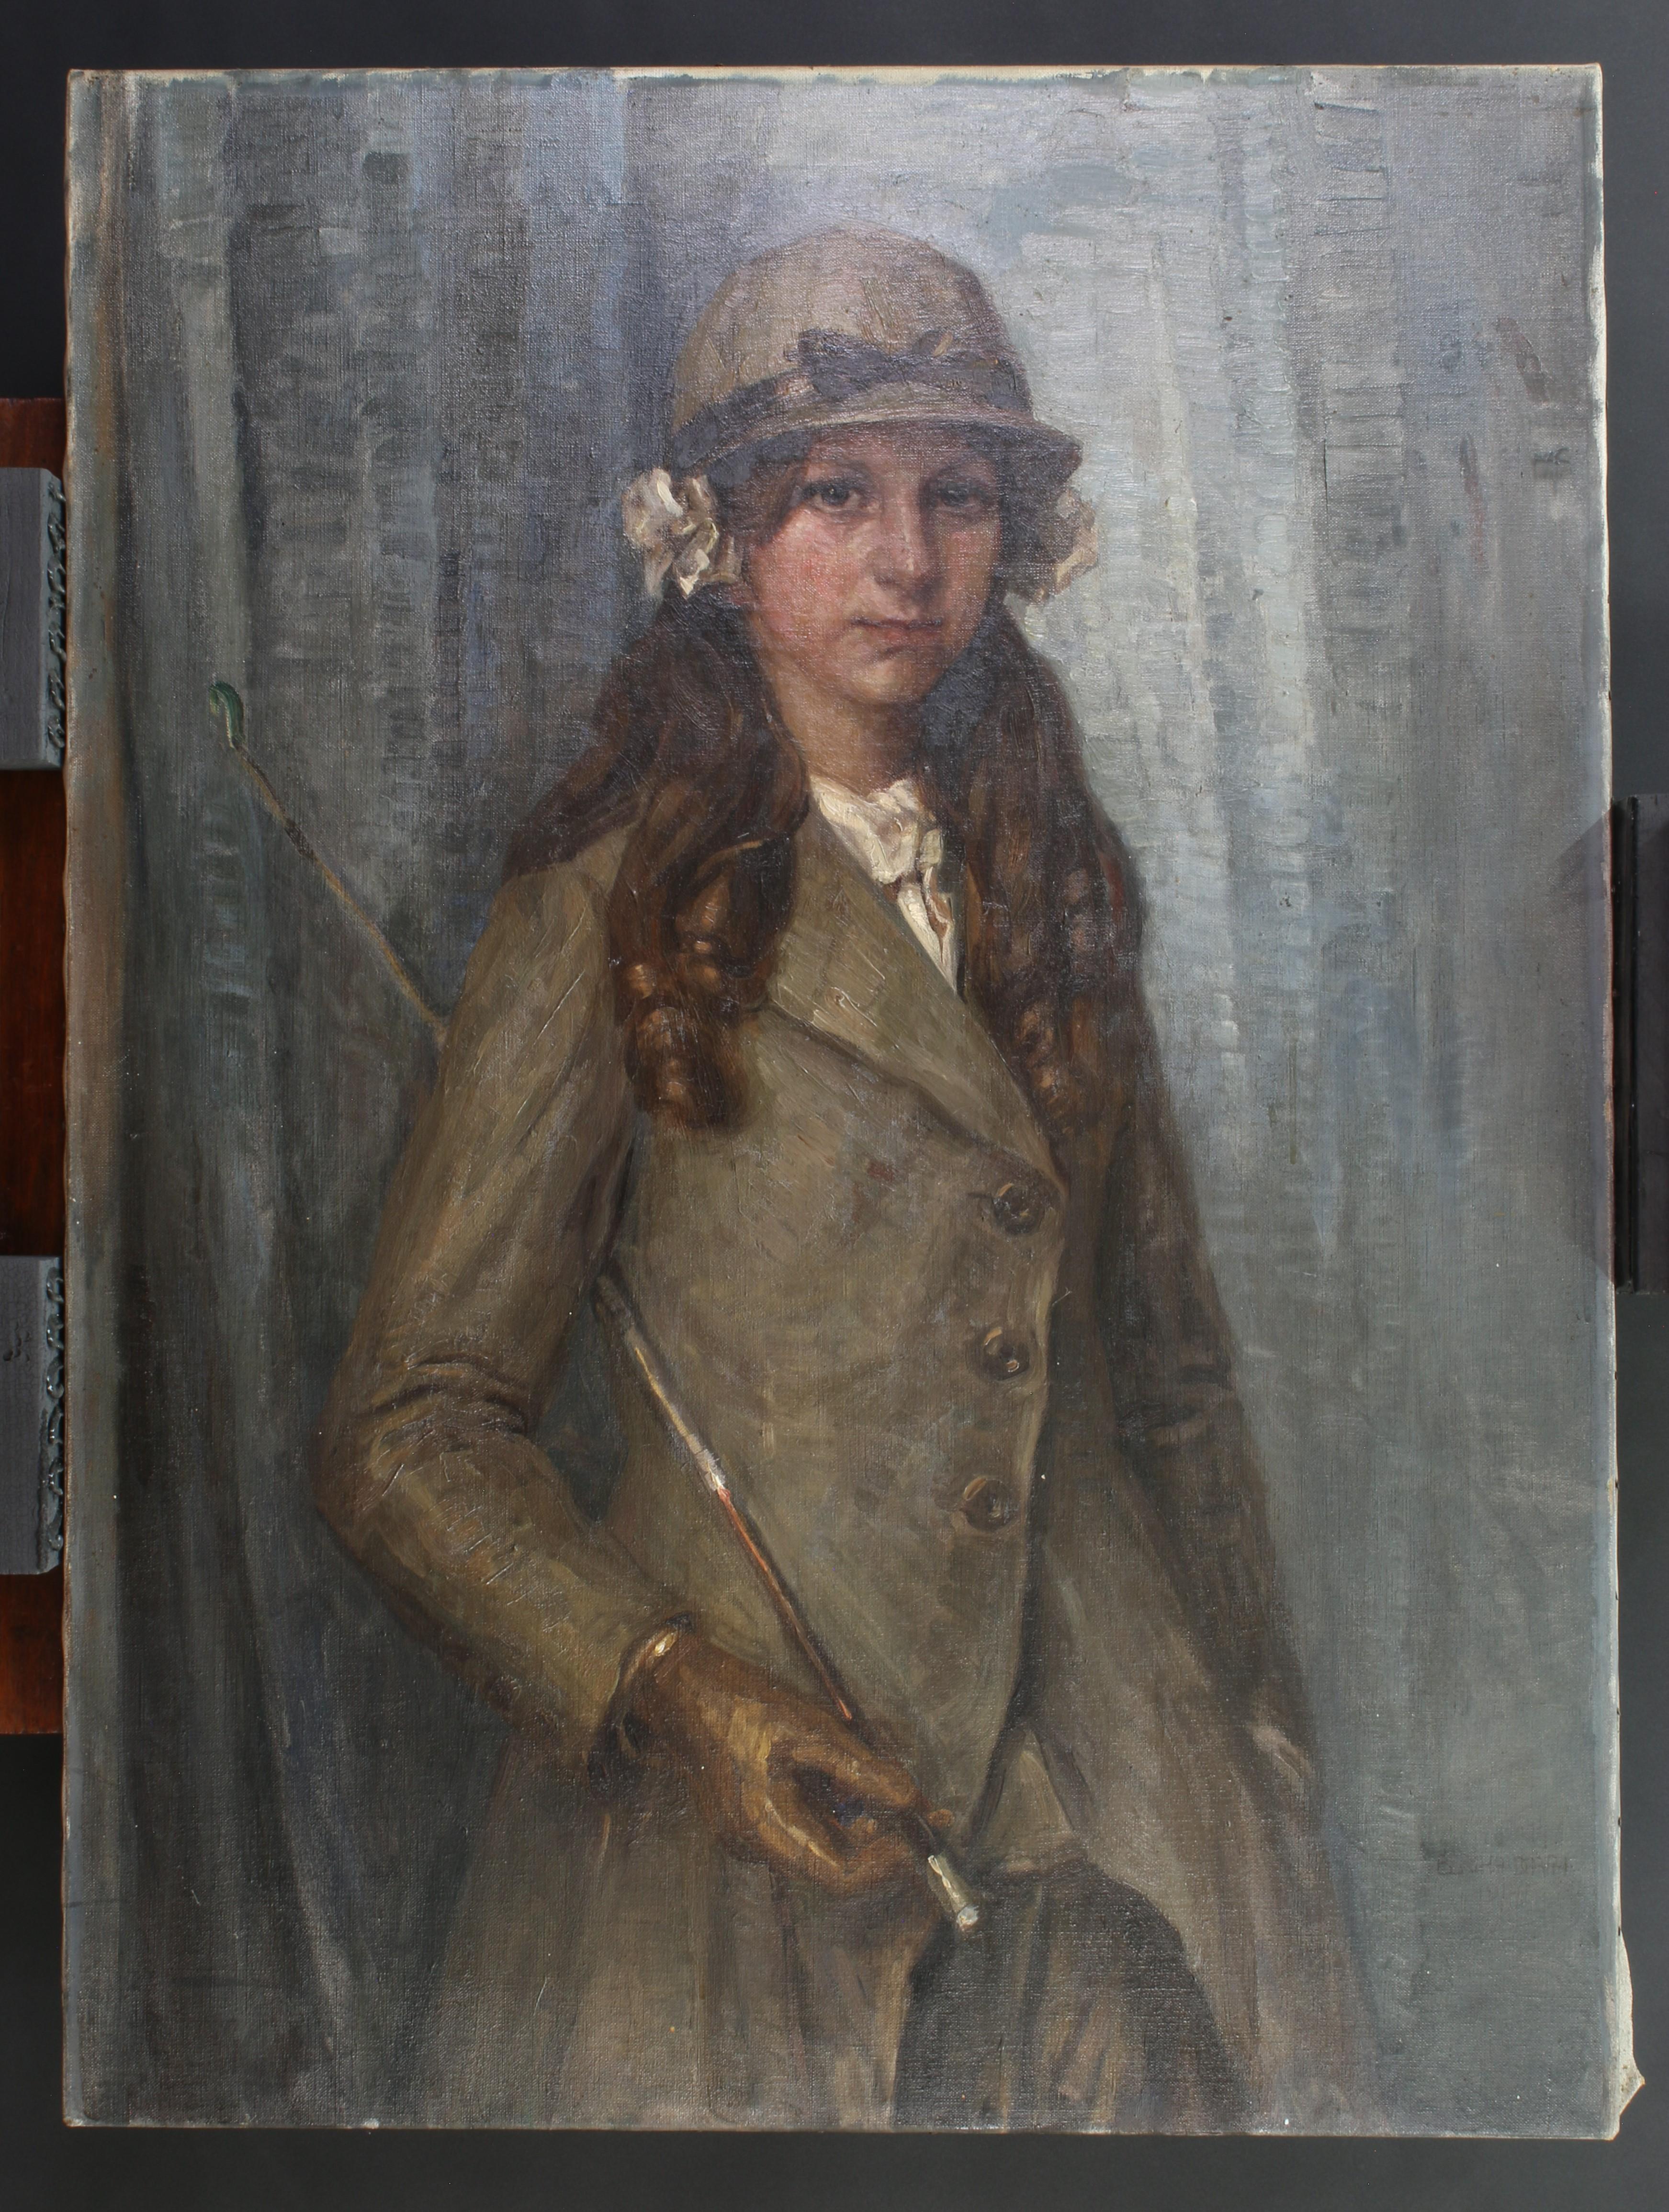 Bertha Dorph Portrait Painting - Portrait of a young girl in riding attire